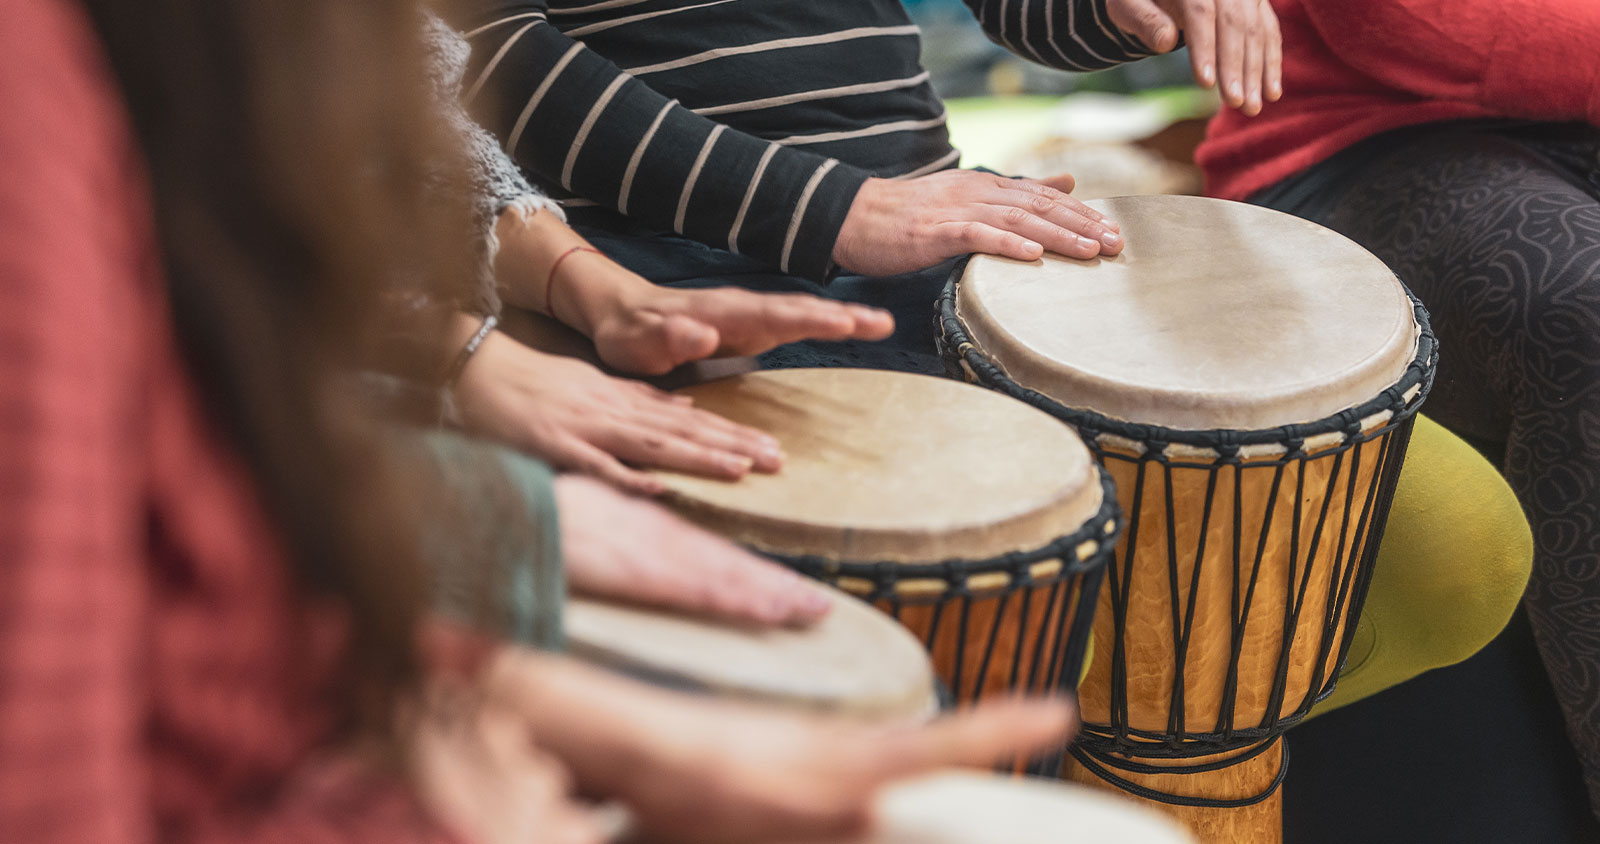 People drumming together